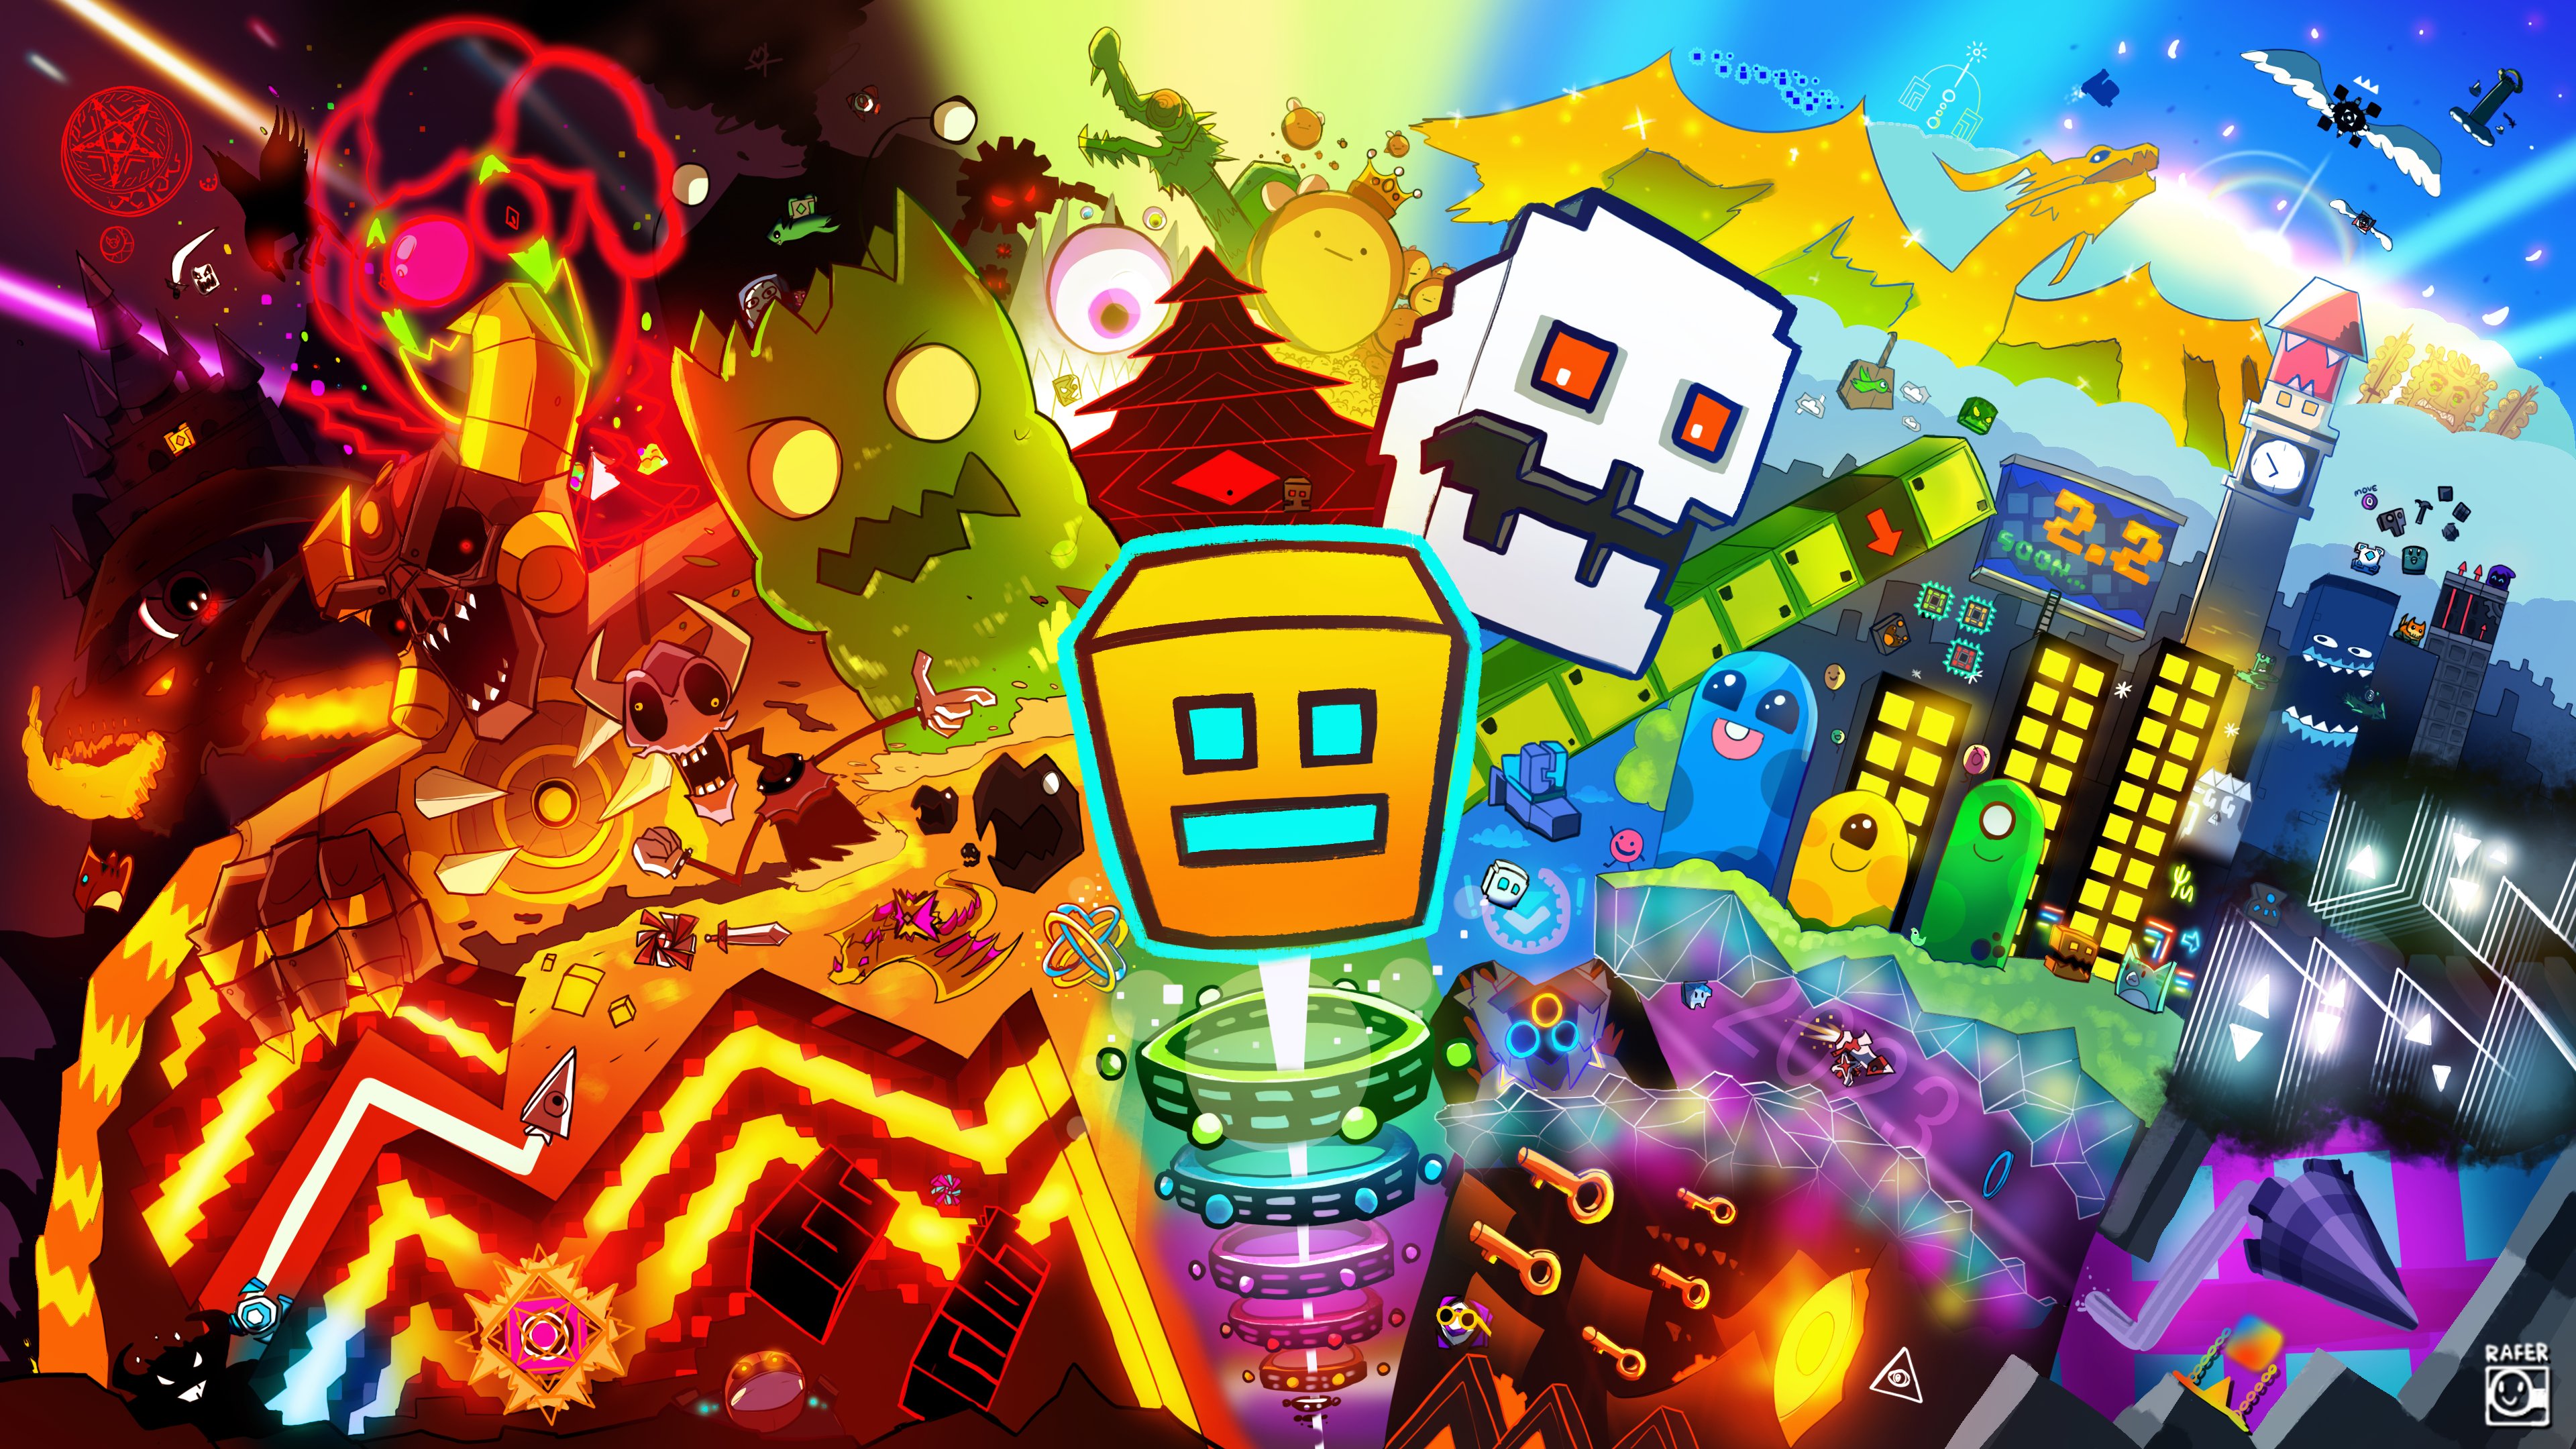 How To Install Geometry Dash 2.2 - iOS, Android, & PC